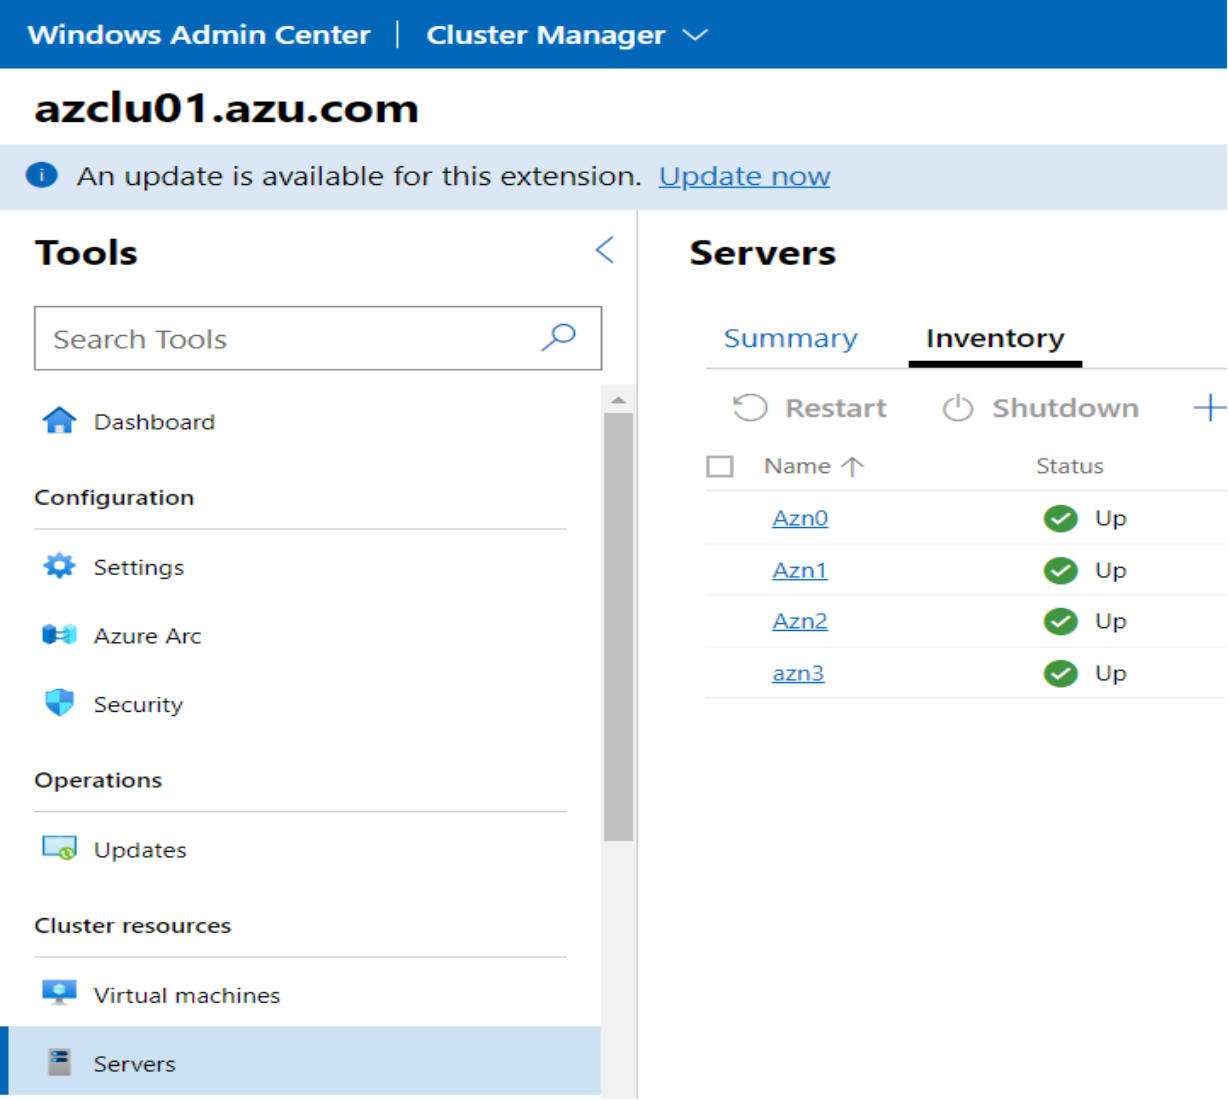 This image shows the dashboard view for the WAC cluster manger when Azure Stack HCI is registered successfully 